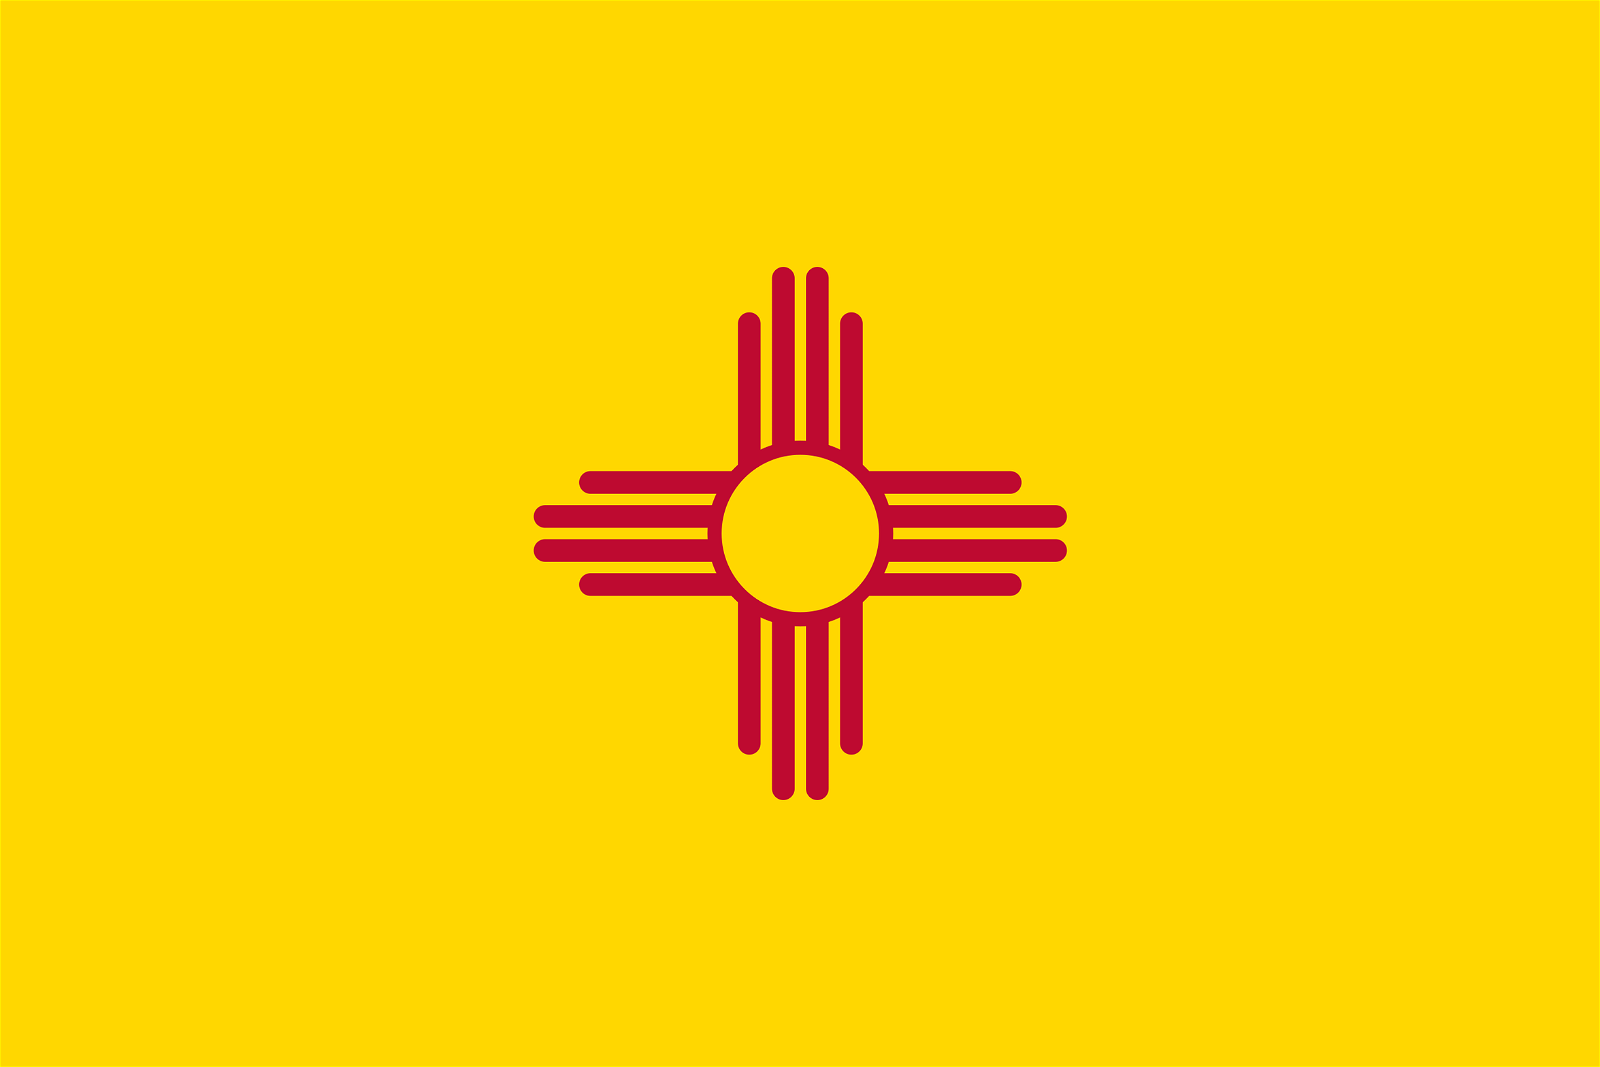 2022 New Mexico Governor Election image